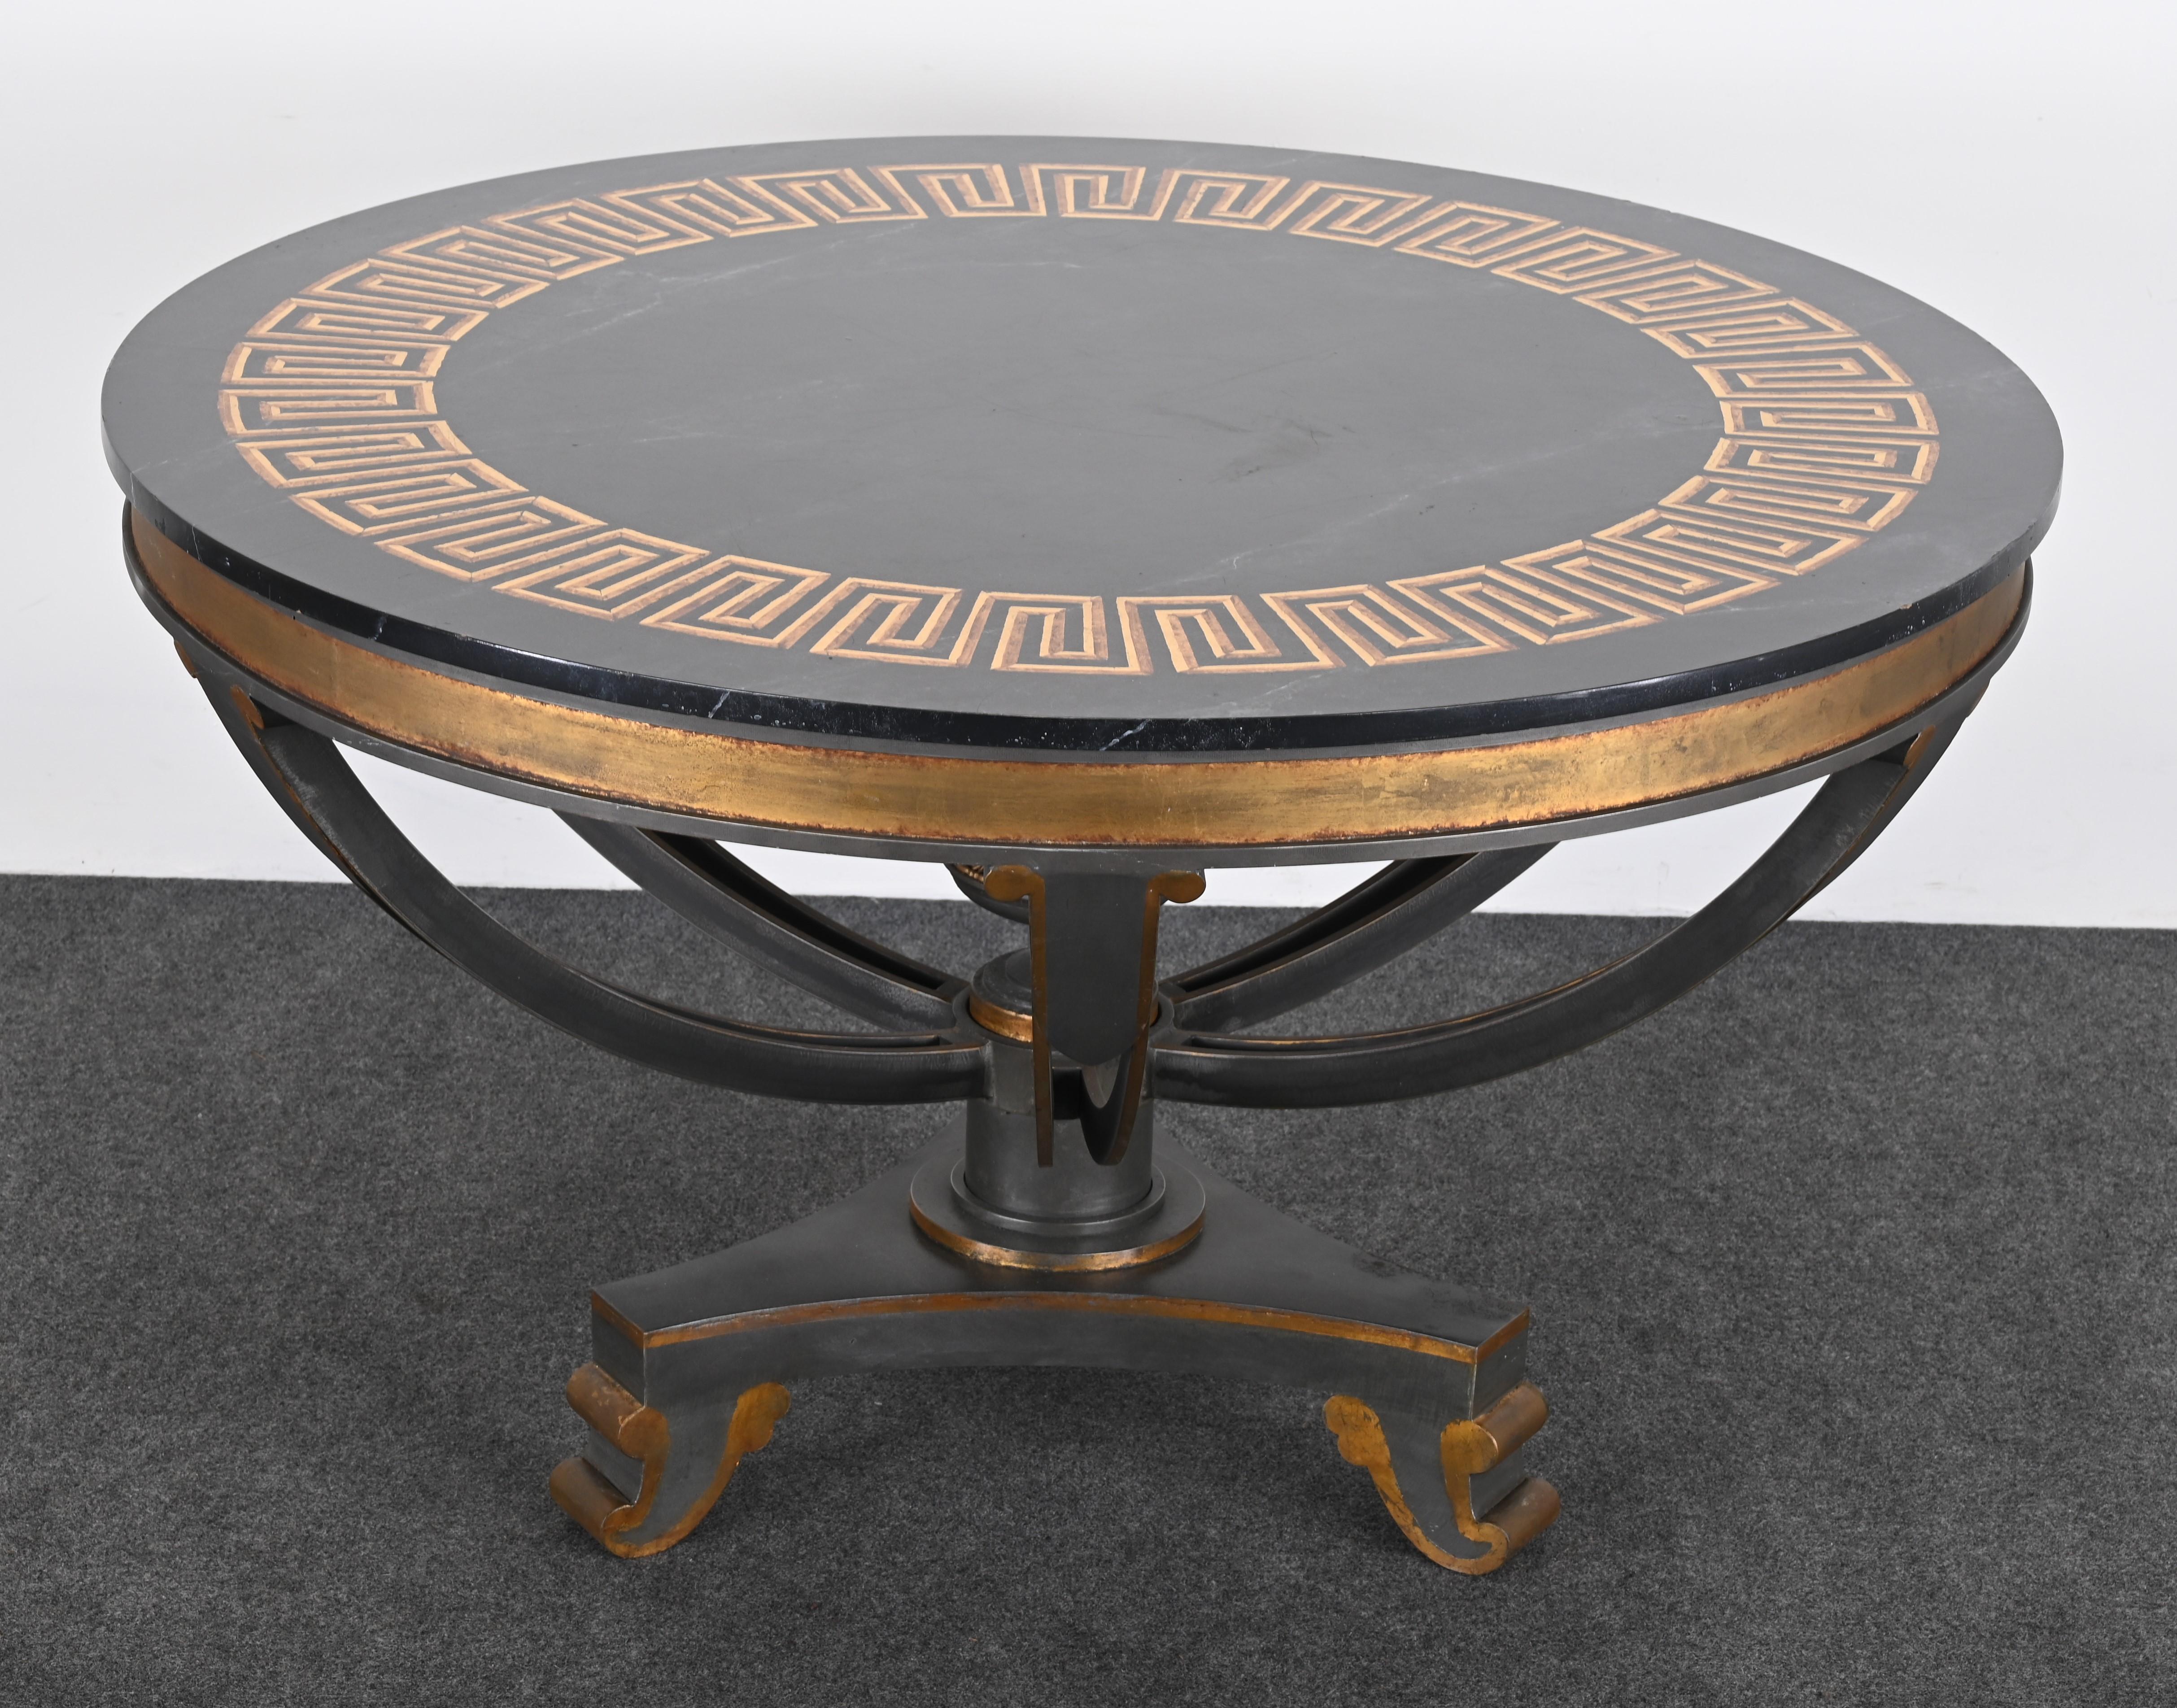 A monumental center table or dining table crafted by Niermann Weeks renowned for unique craftsmanship and bespoke design. This magnificent table came from a high-end estate. The table is custom designed and made of cast iron and steel patinated with